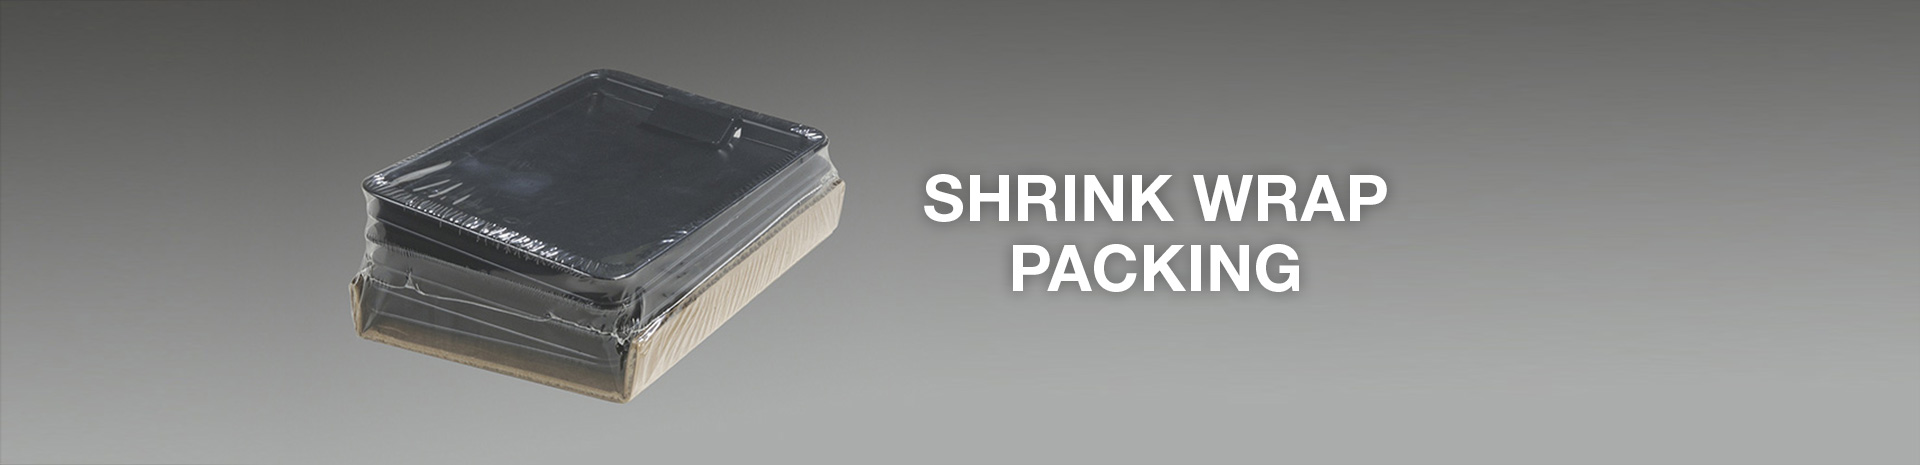 Shrink Wrap Packing